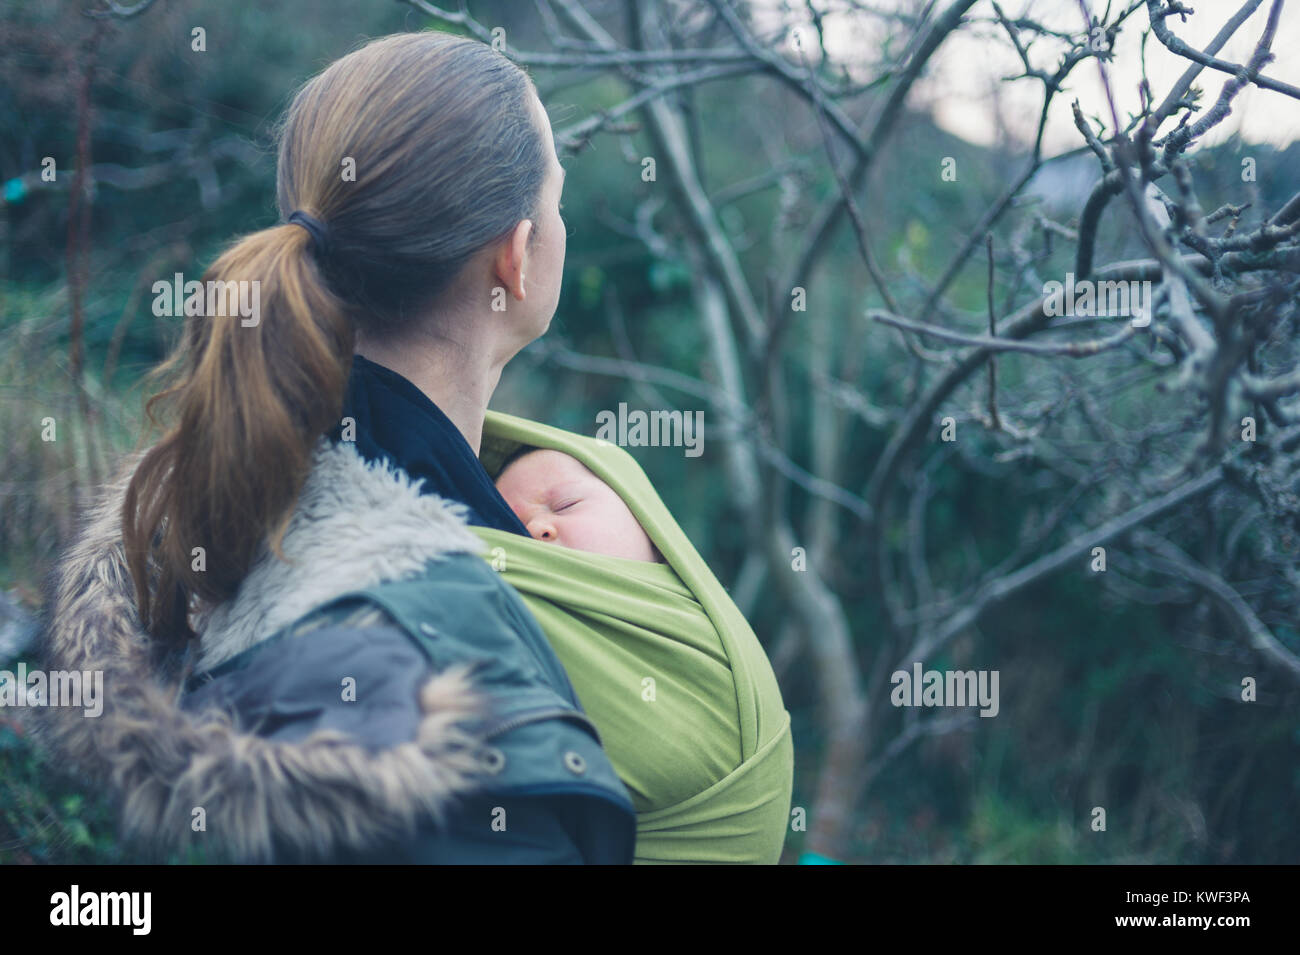 A young mother with her baby in a sling is walking in nature Stock Photo